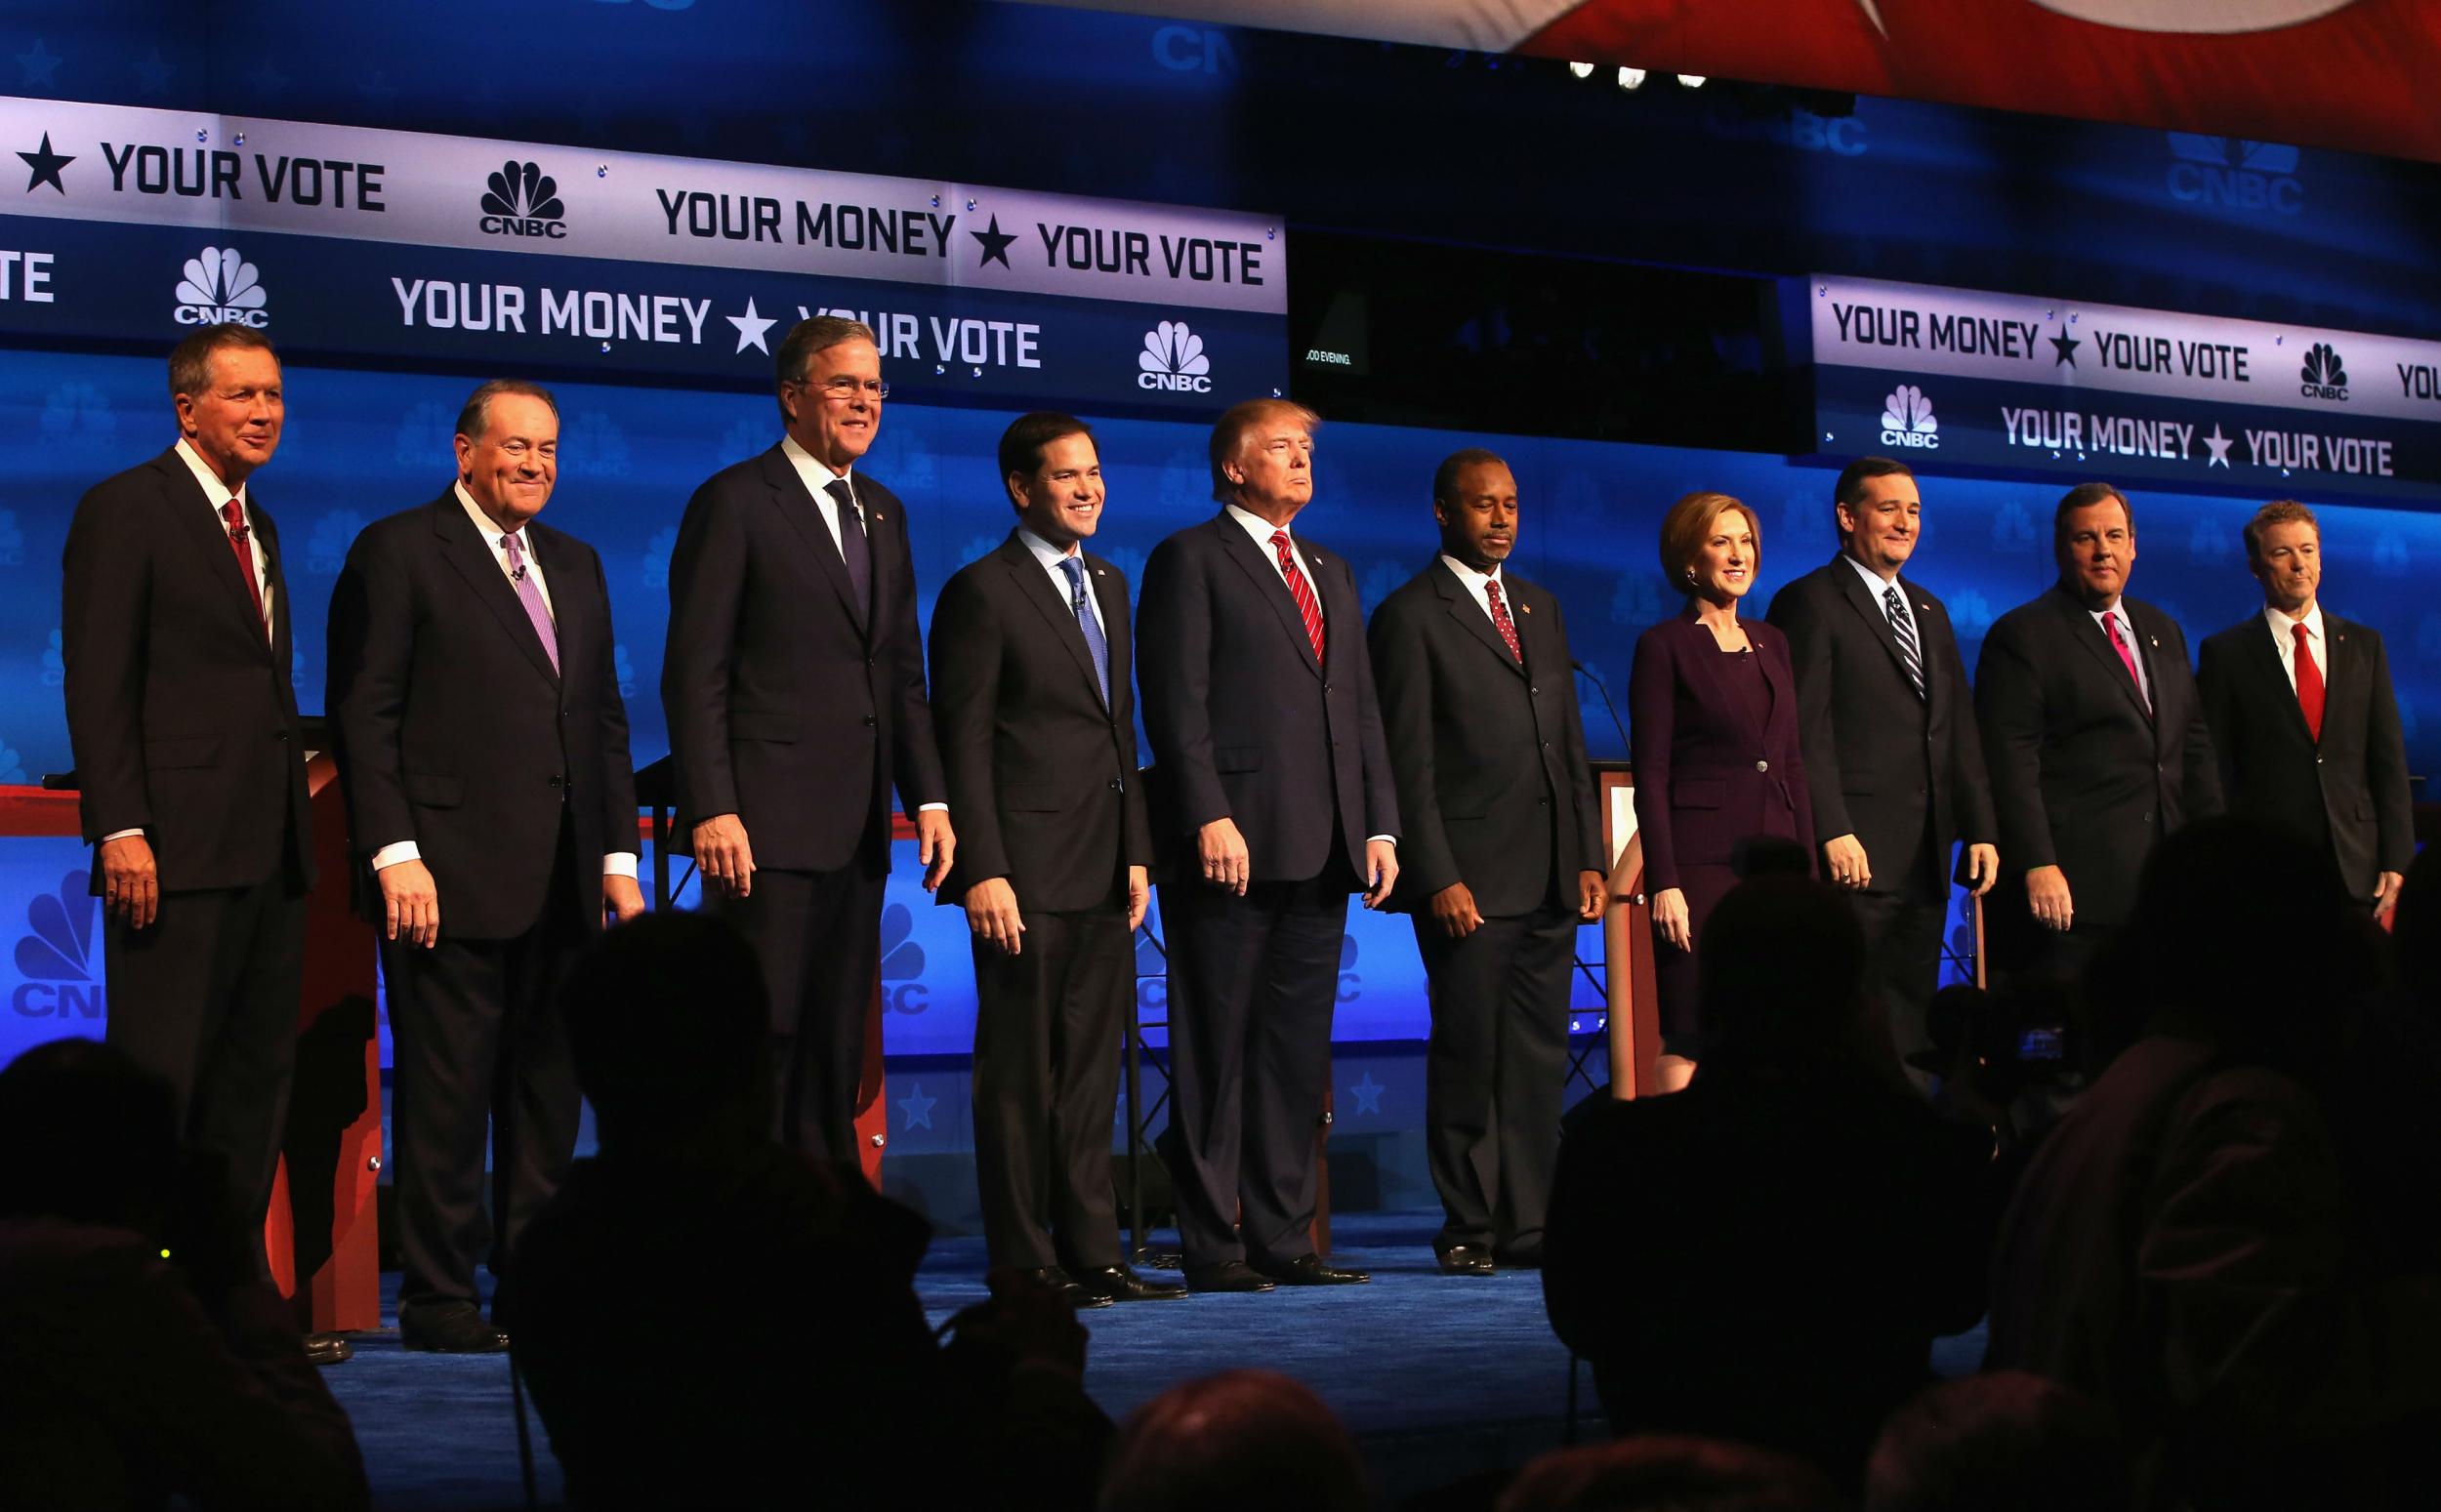 Ten Republican hopefuls took to the stage